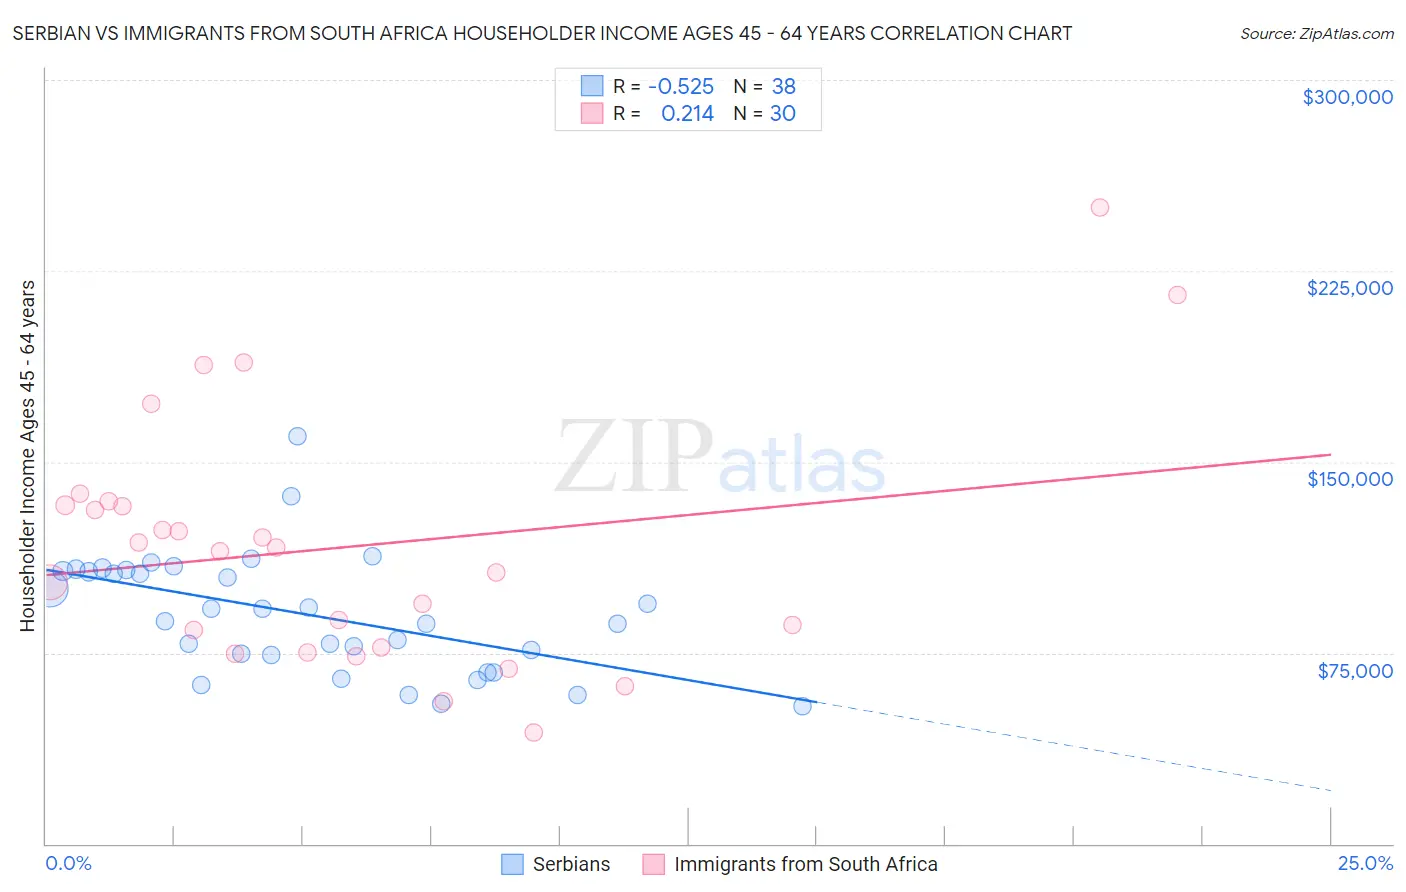 Serbian vs Immigrants from South Africa Householder Income Ages 45 - 64 years